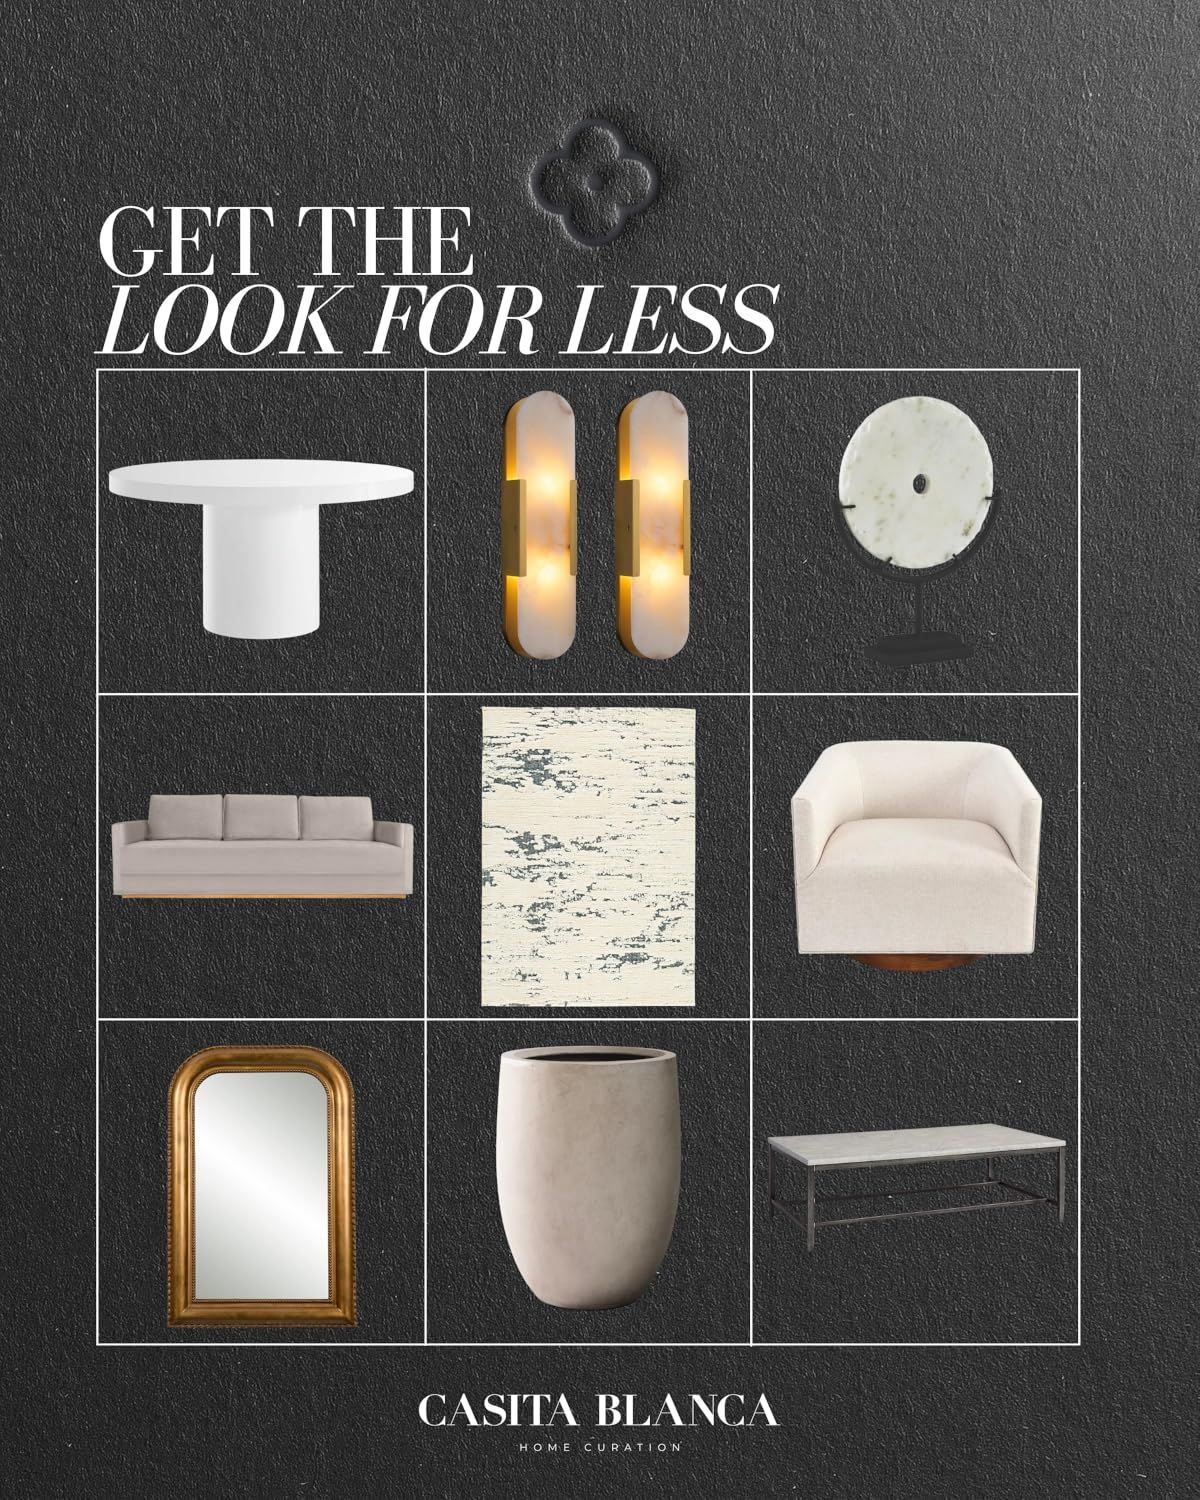 Get the look for less | Amazon (US)